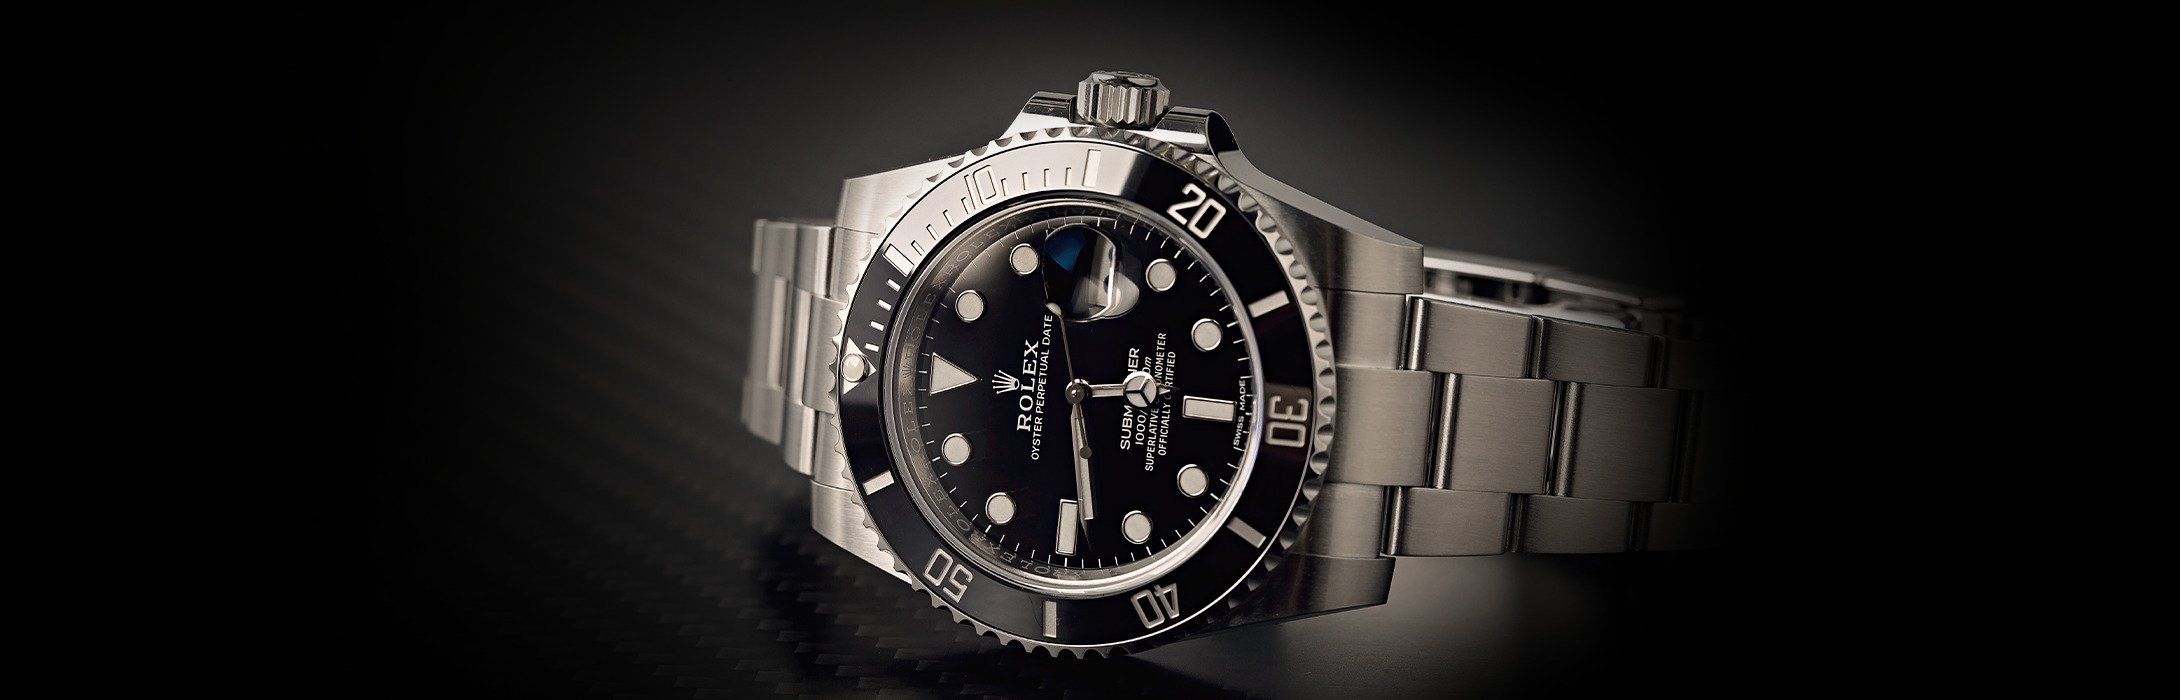 3 Blue Submariners That Will Blow Your Mind - Bob's Watches